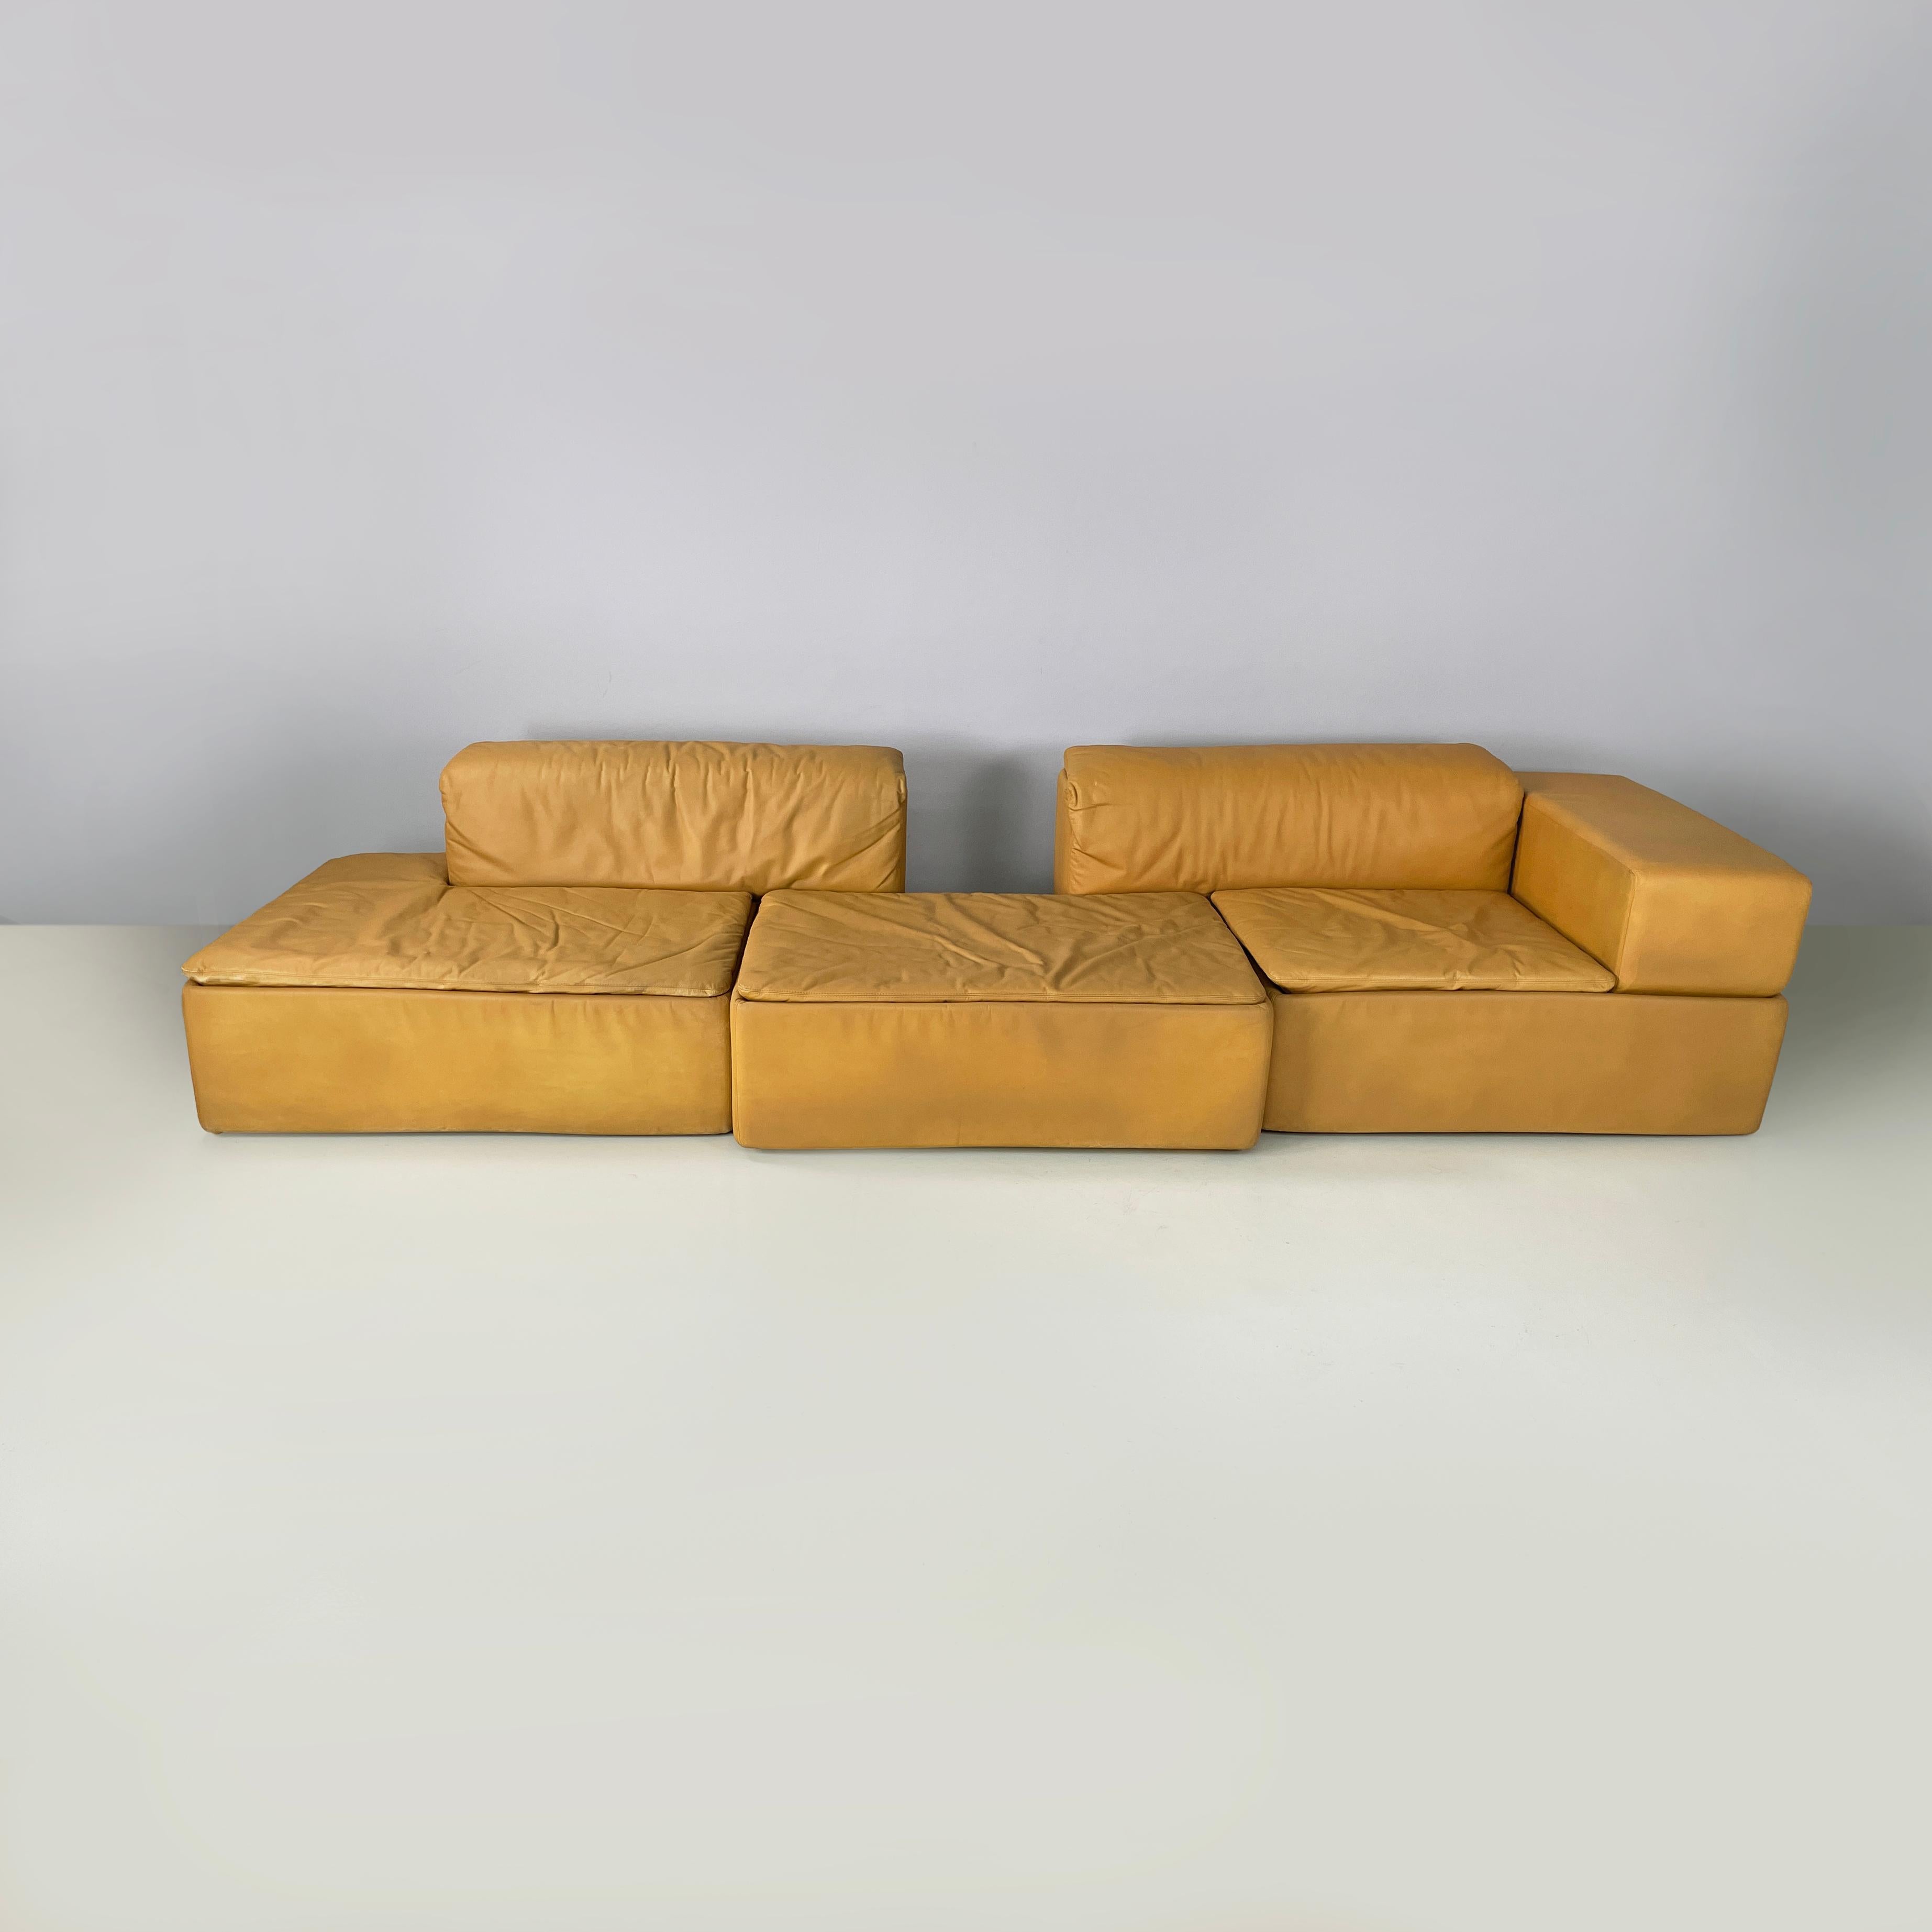 Italian modern Brown leather modular sofa Paione by Salocchi for Sormani, 1970s For Sale 2